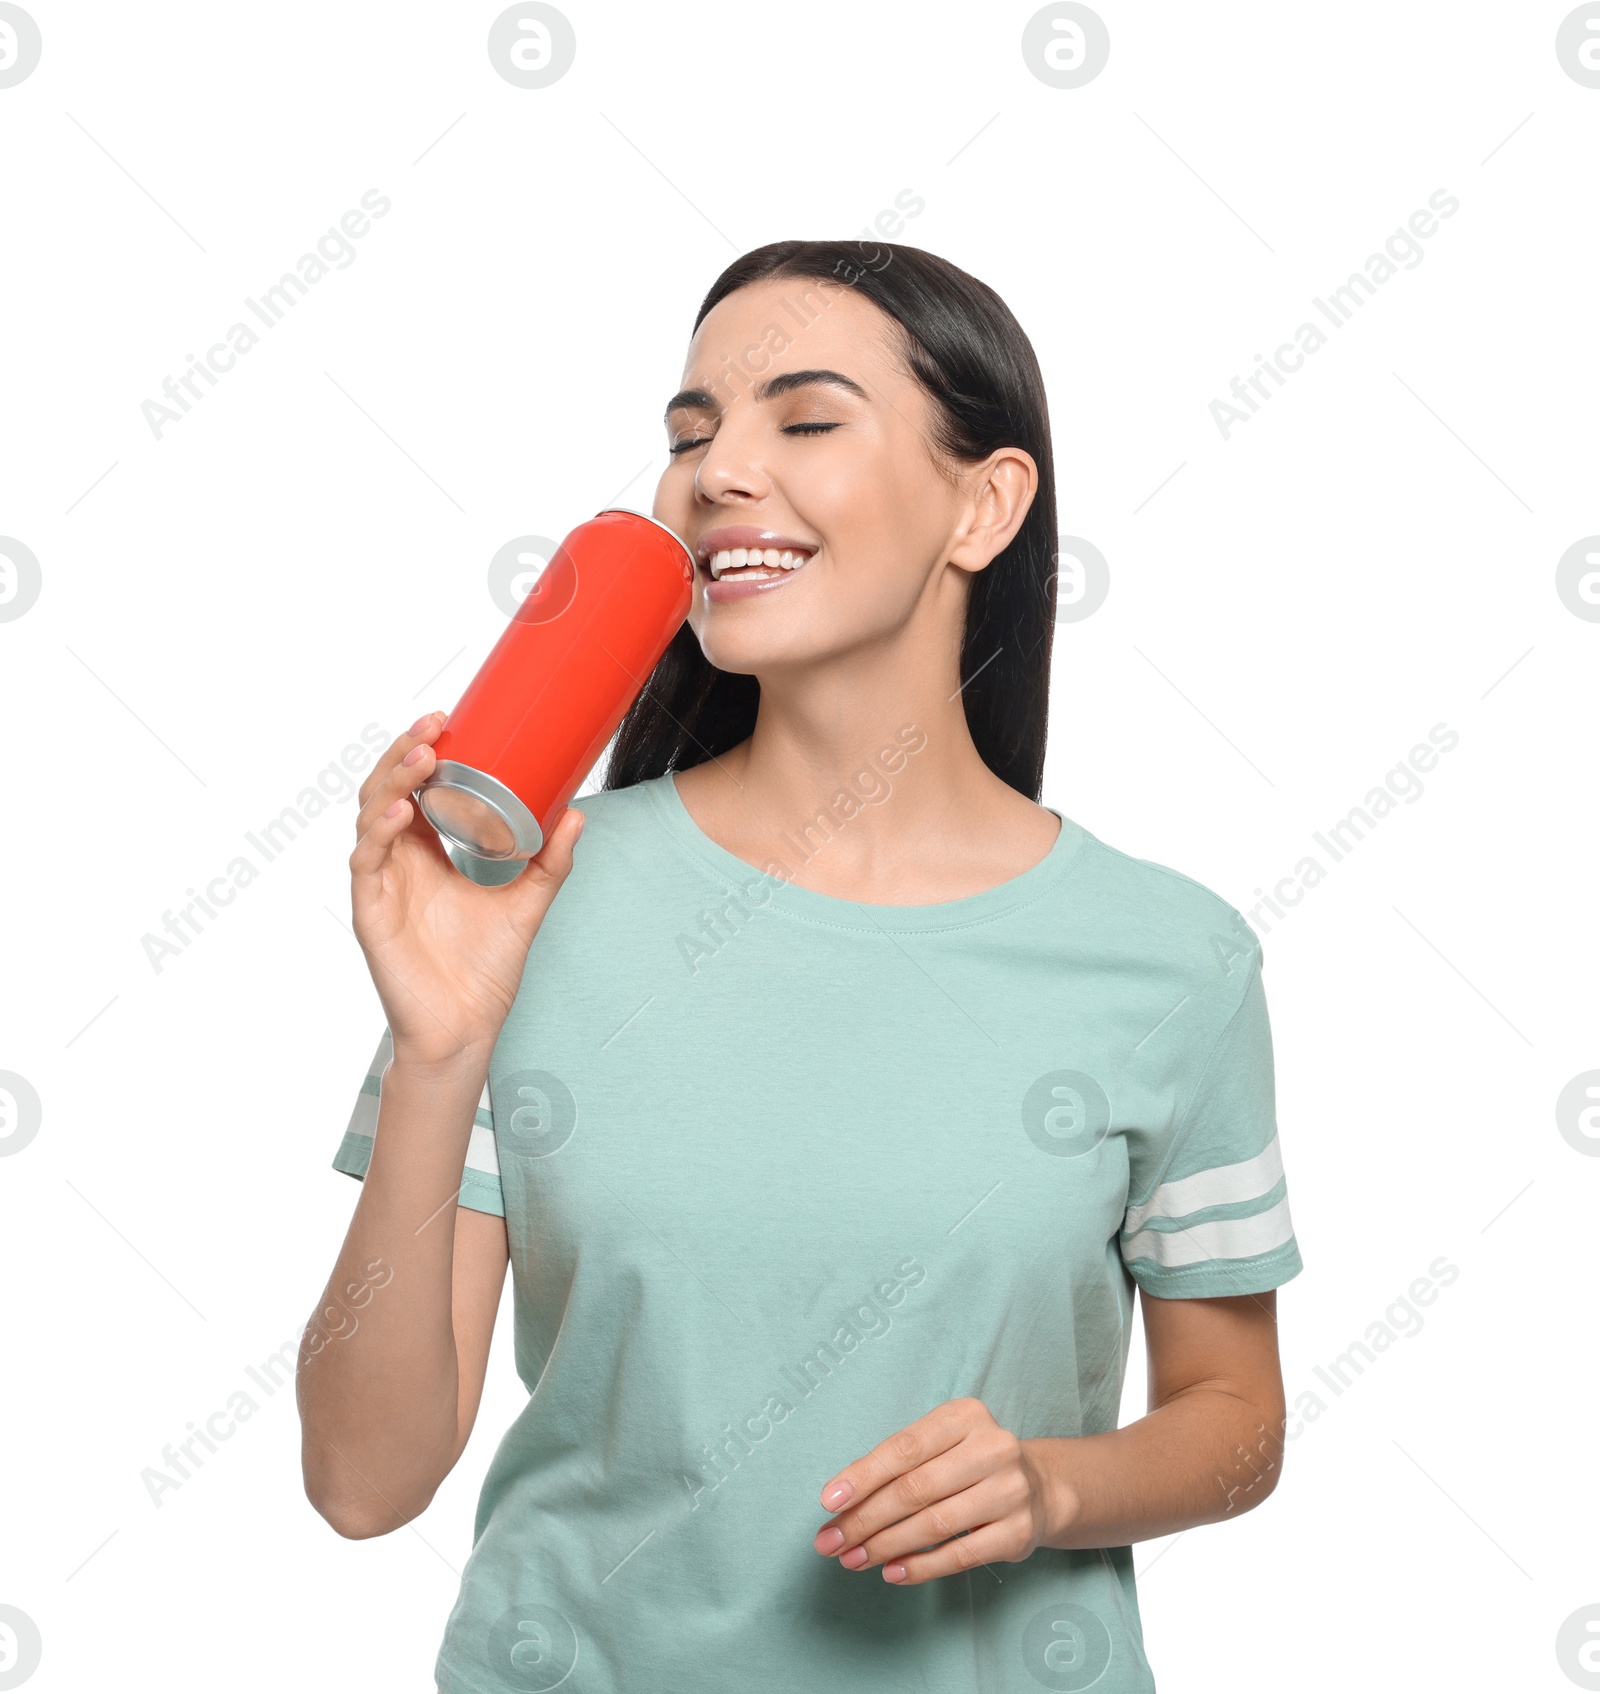 Photo of Beautiful happy woman holding red beverage can on white background